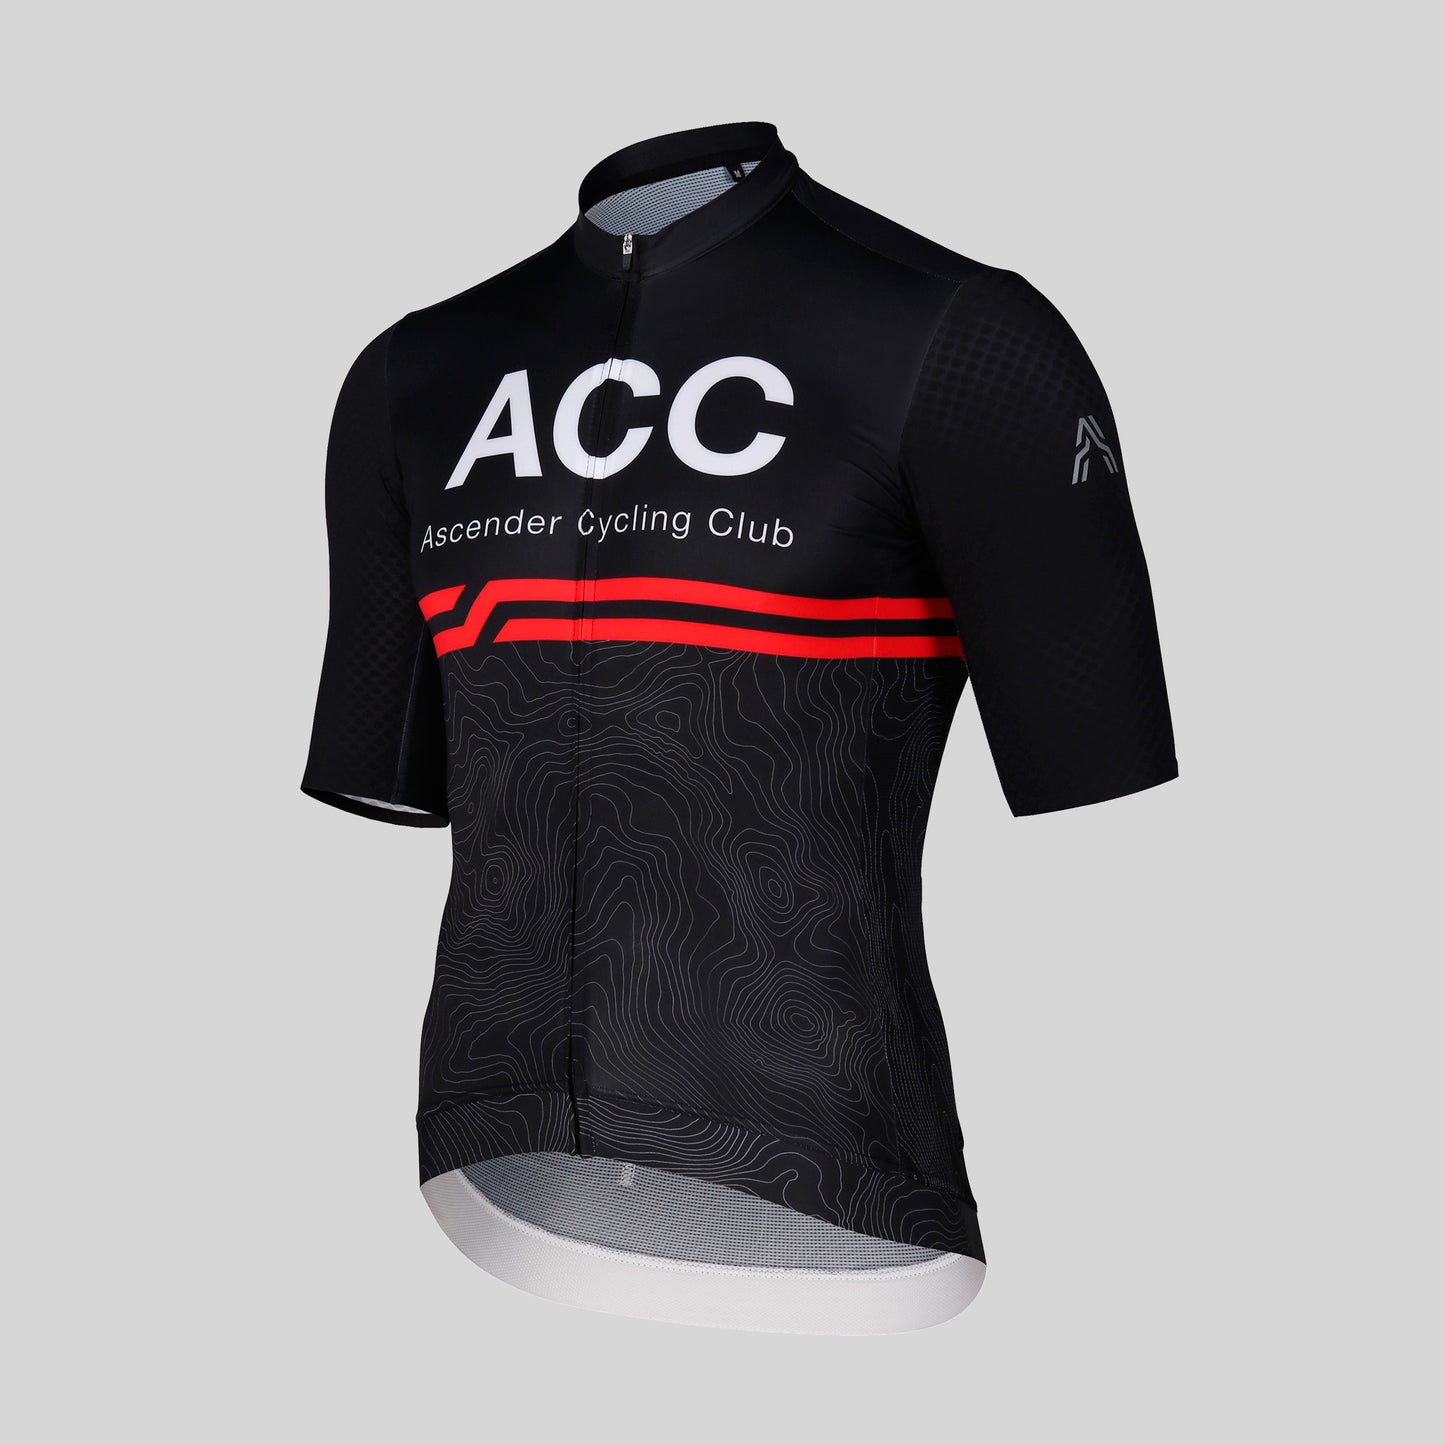 ACC Stellar sustainable cycling short sleeve jersey race cut from Ascender Cycling Club Zürich Switzerland Presentation Front Side Monogram Logo on Sleeves